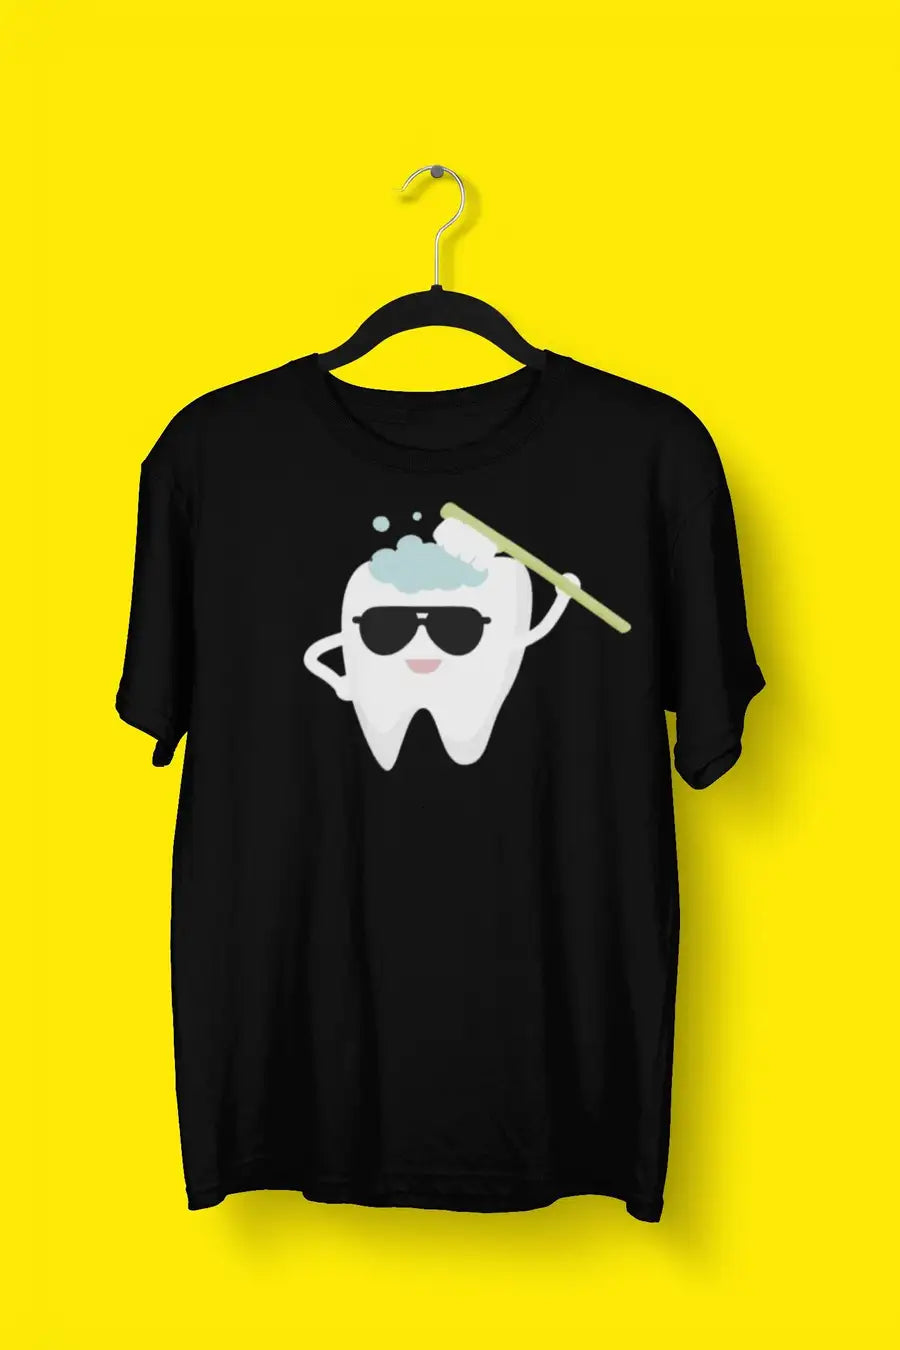 Toothbrushing Funny T Shirt For Men and Women | Premium Design | Catch My Drift India - Catch My Drift India Clothing black, clothing, dentist, funny, made in india, multi colour, shirt, t sh